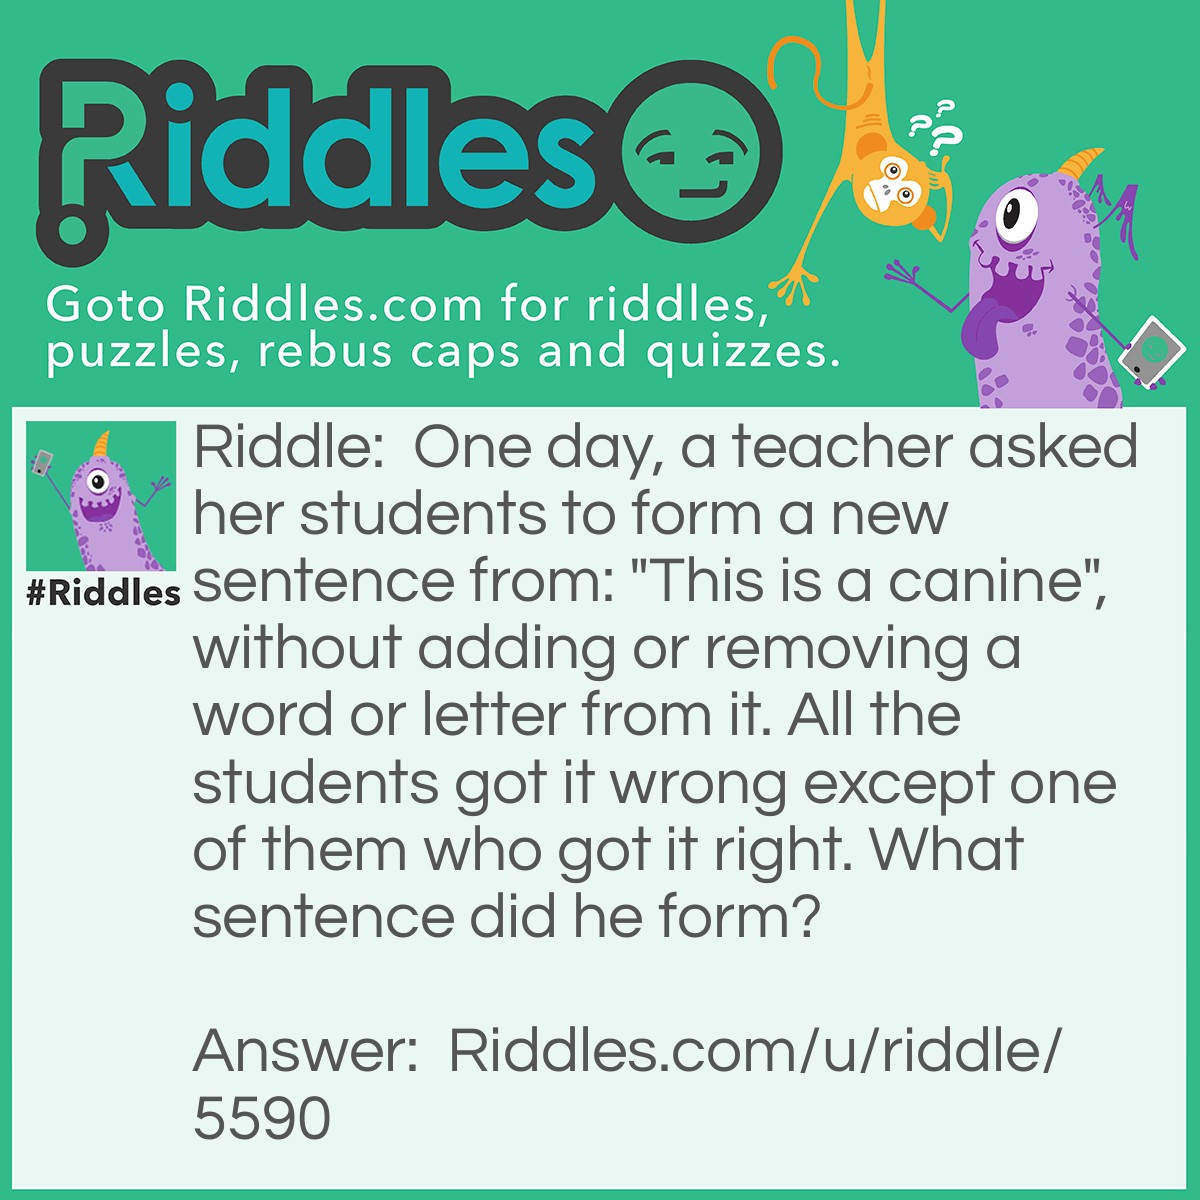 Riddle: One day, a teacher asked her students to form a new sentence from: "This is a canine", without adding or removing a word or letter from it. All the students got it wrong except one of them who got it right. What sentence did he form? Answer: The Sentence he formed is, "This is a can in e".